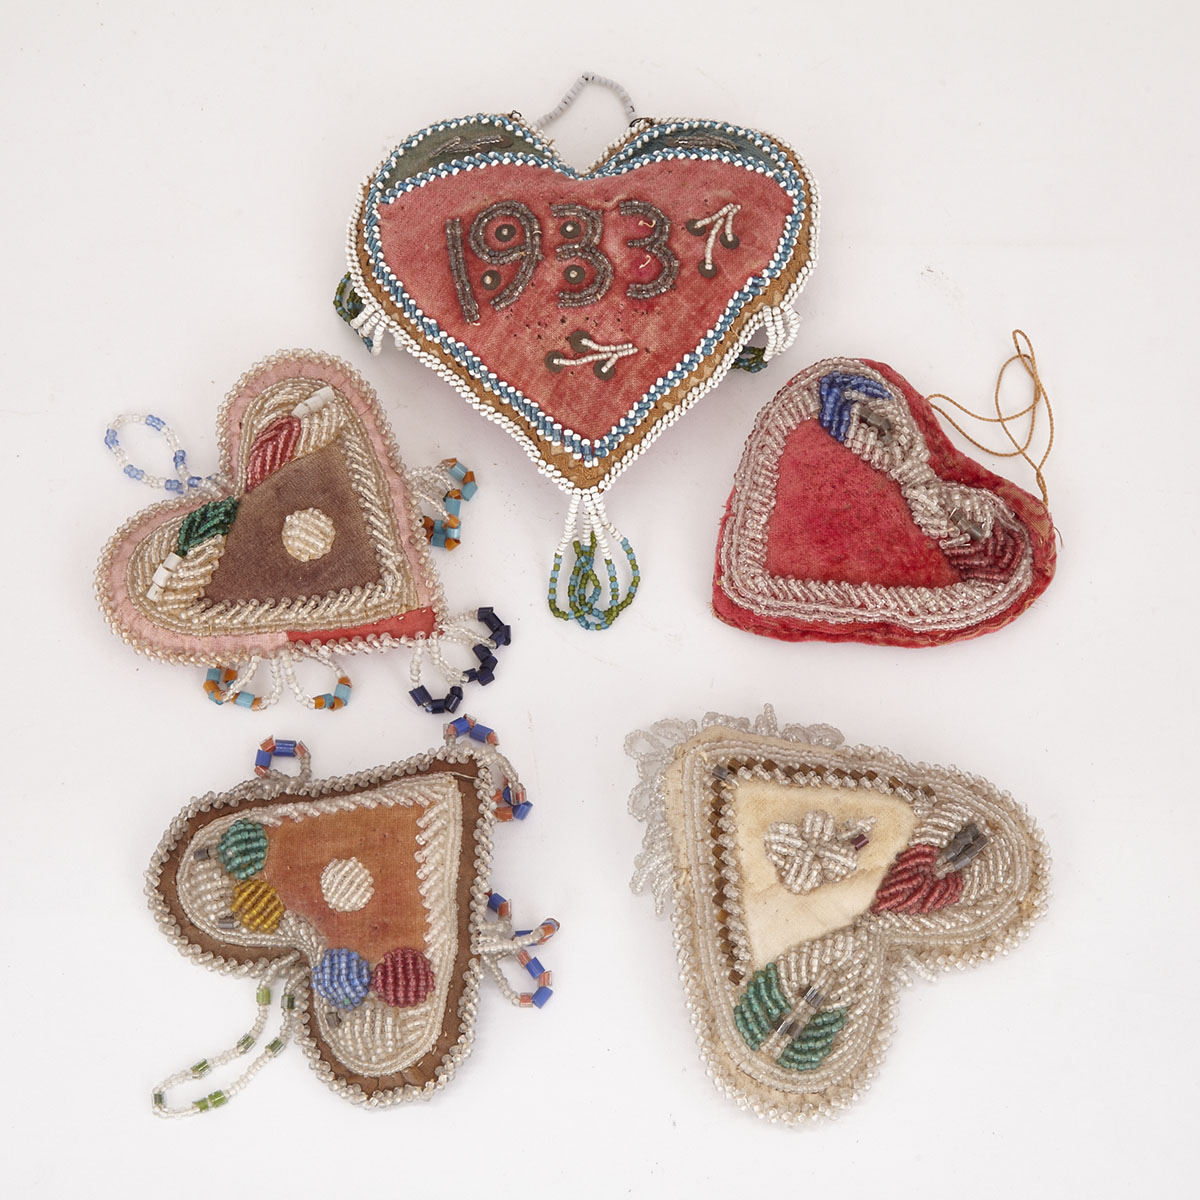 Five Iroquois  Beaded Heart Shaped Pin Cushion Whimsies, early 20th century